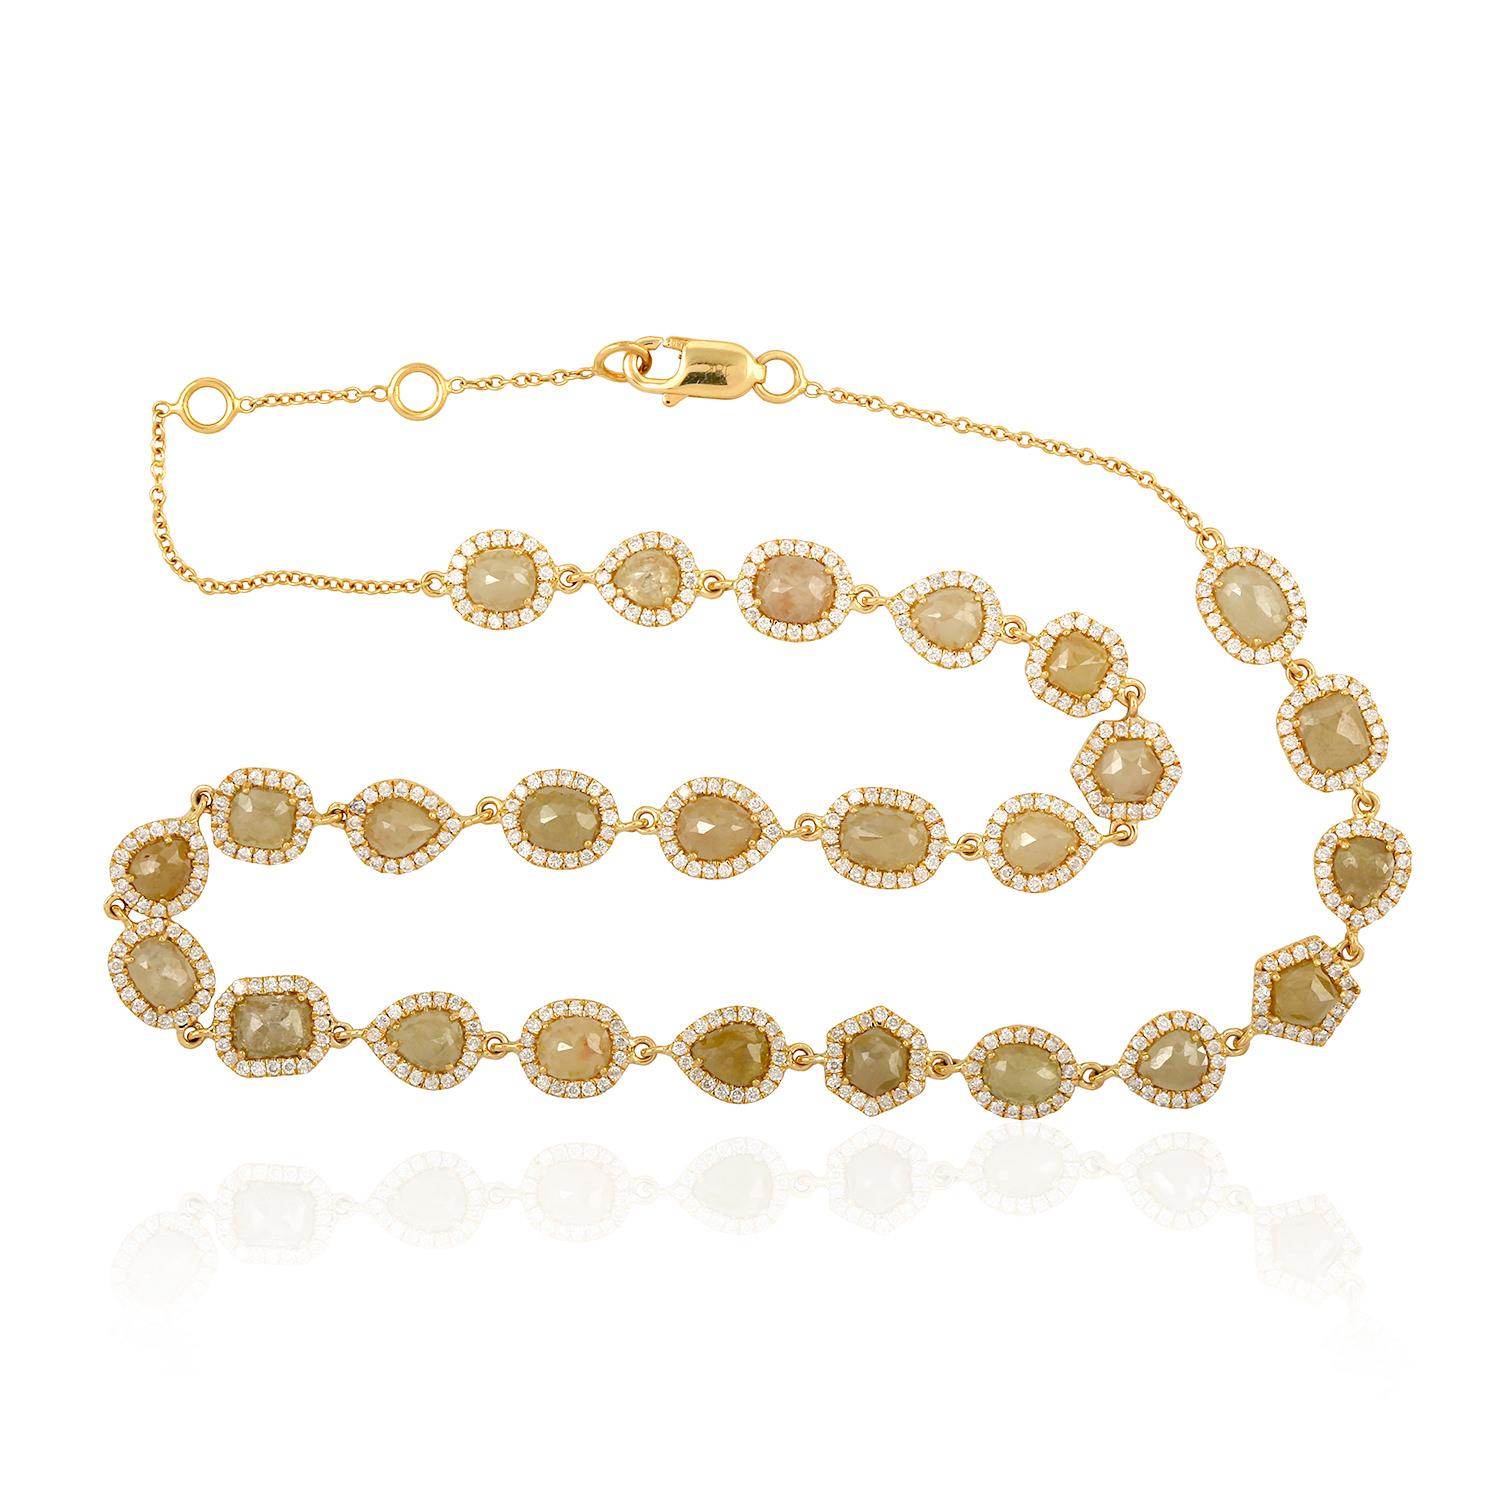 This classy looking Golden Color Ice Diamond choker Necklace in 18K Yellow Gold is 18inch long and can be layered or word alone to make amazing statement. 

Closure: Lobster Clasp with 2 jumprings to adjust the size

Gold: 18KT:10.741gms
Diamond: